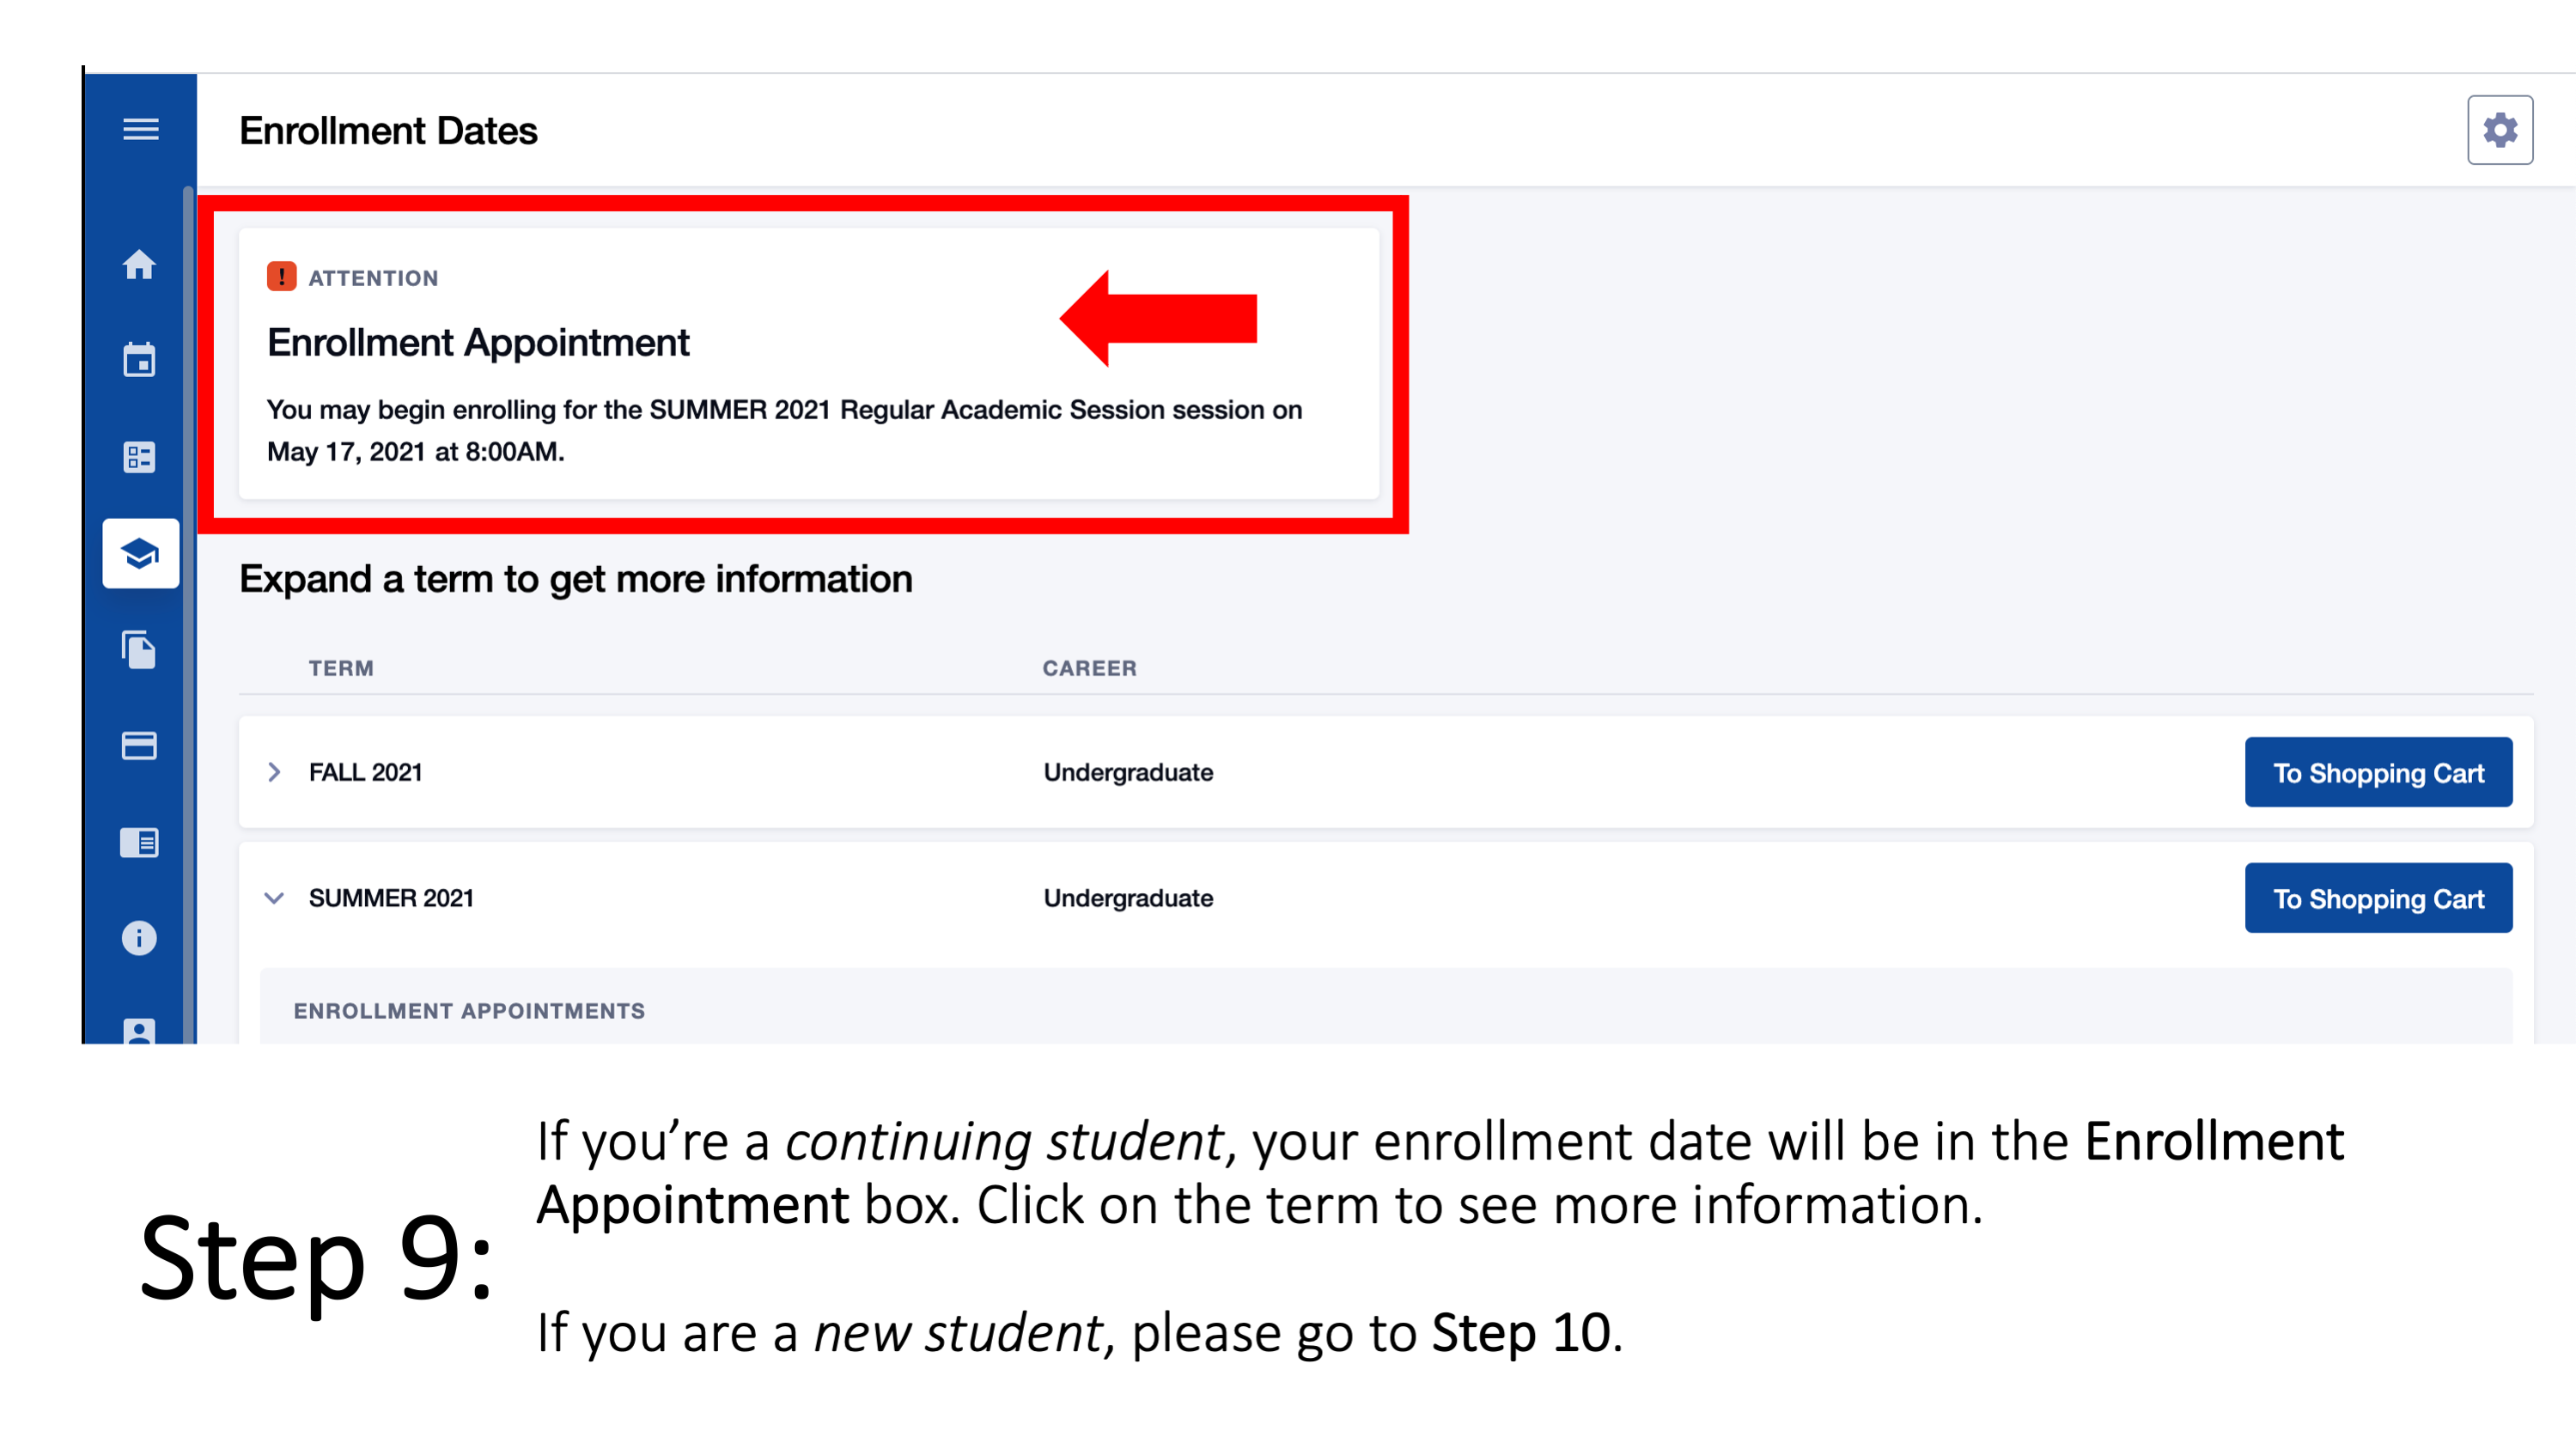 Step 9: If you’re a continuing student, your enrollment date will be in the Enrollment Appointment box. Click on the term to see more information. If you are a new student, please go to Step 10.